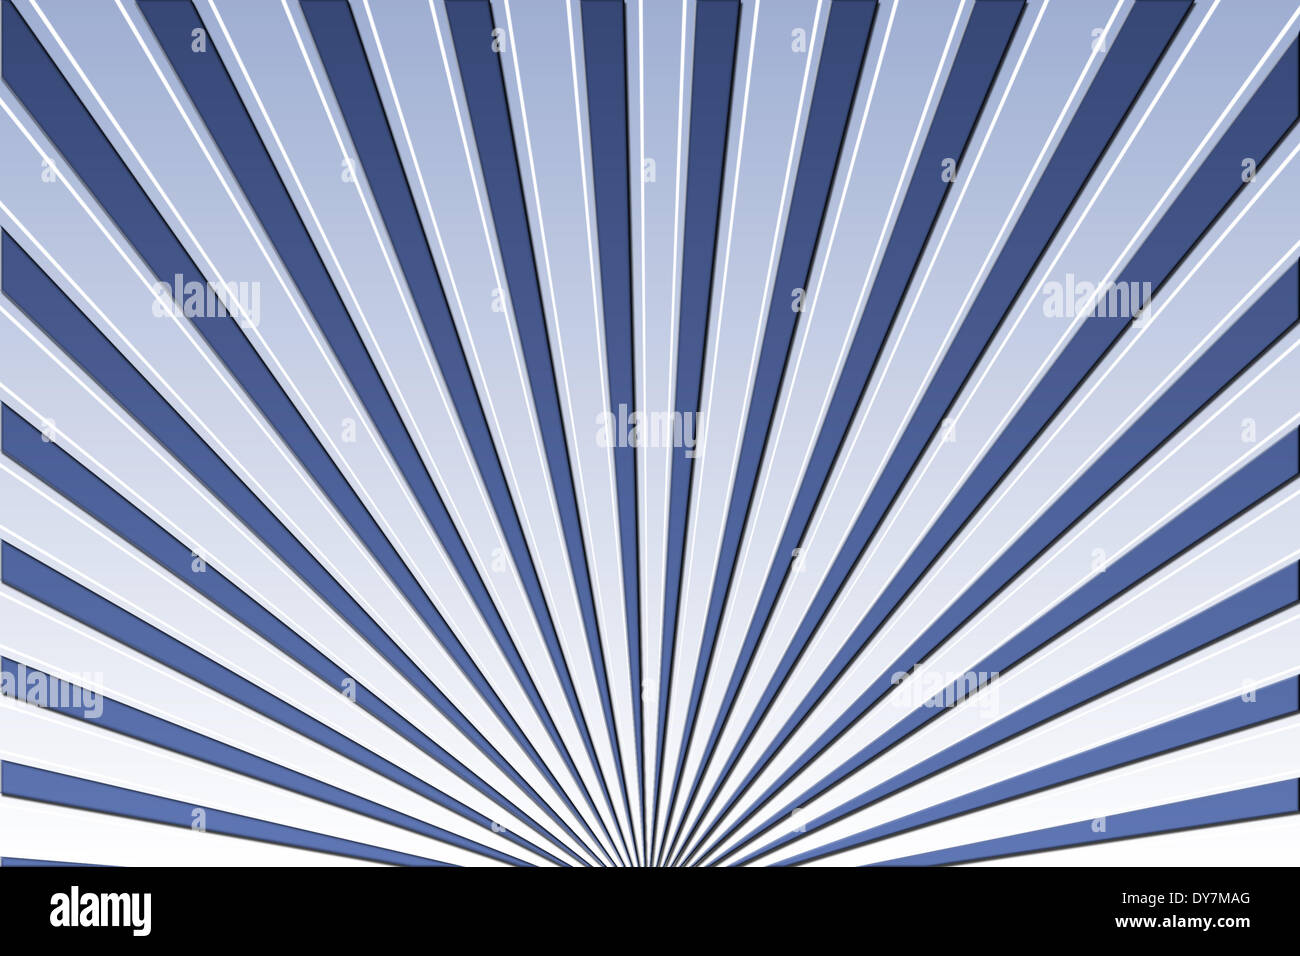 Cool linear pattern in blue Stock Photo